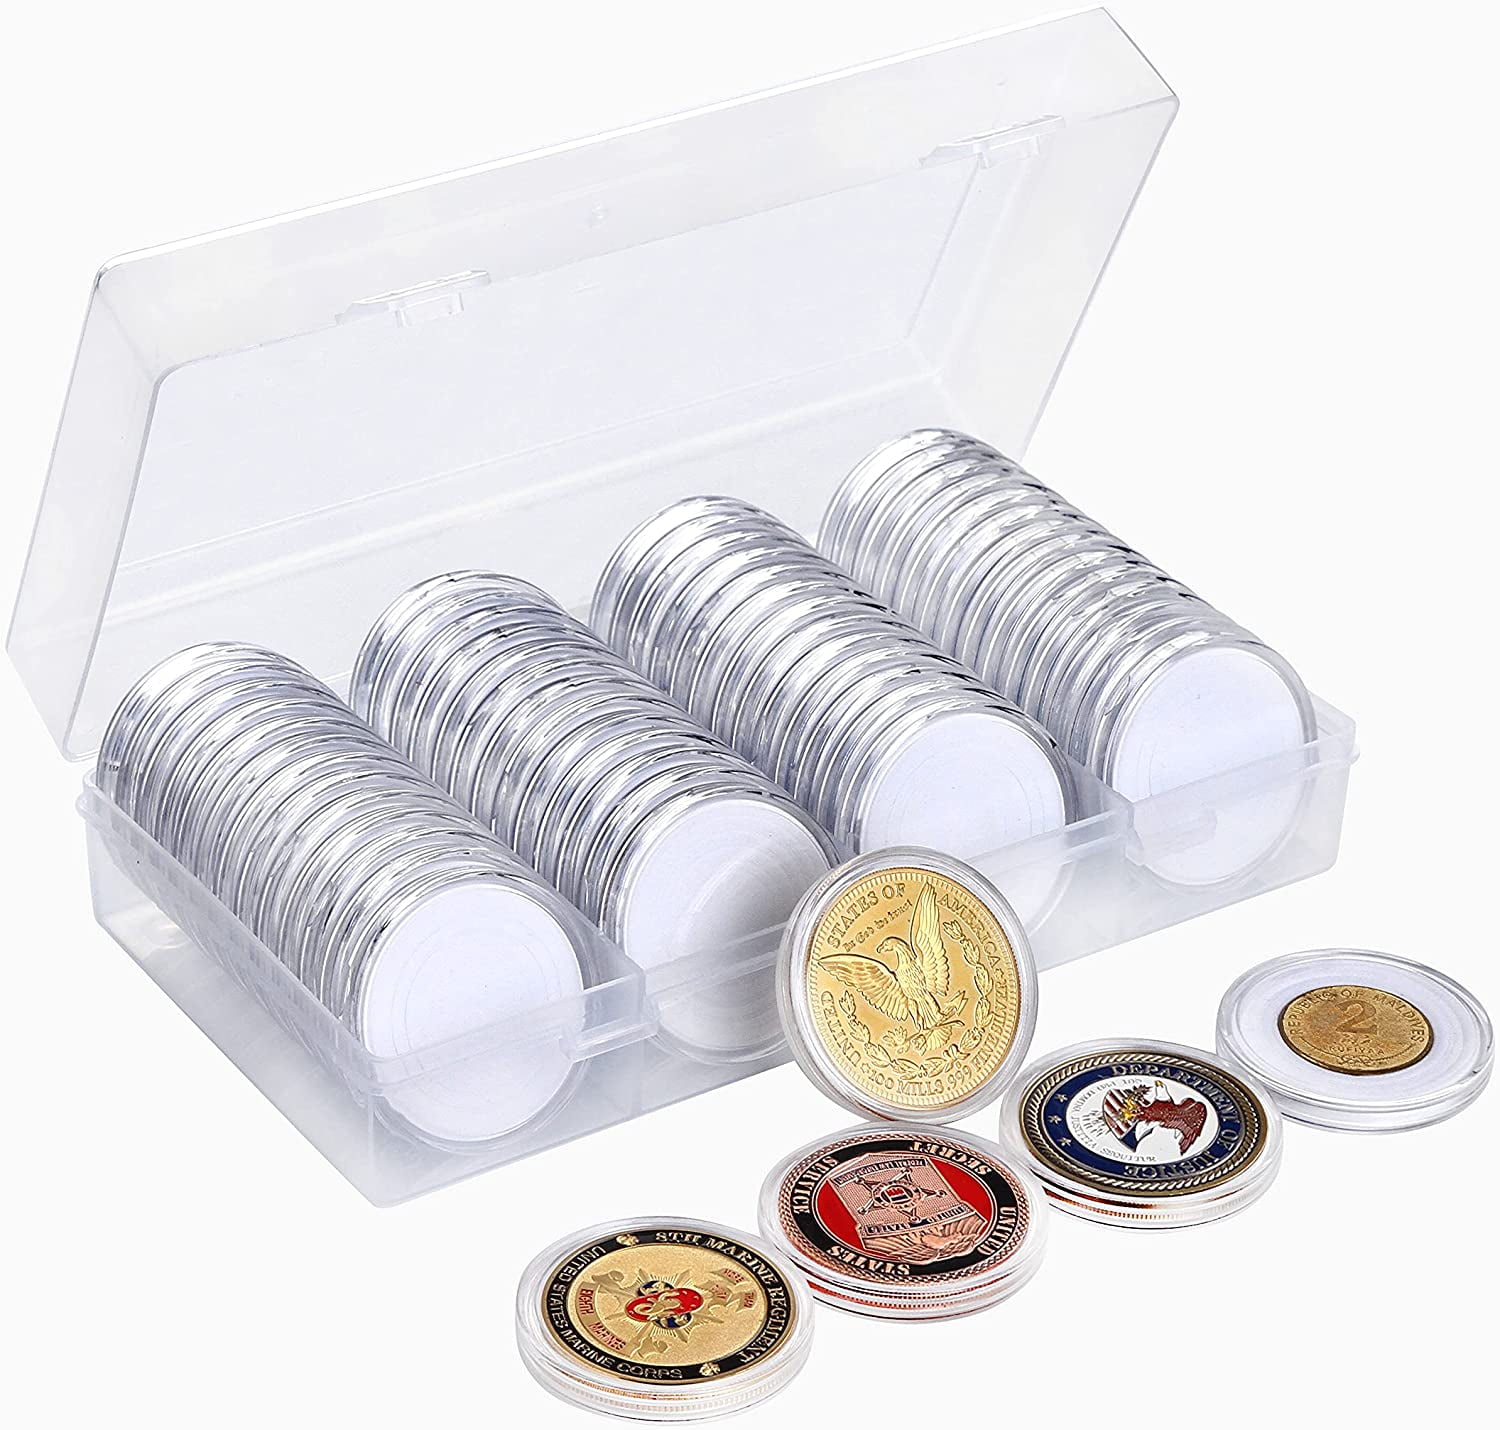 Coin Holder Capsules 100 Pieces Coin Case with Foam Gasket Coin Holder Storage Container with Storage Organizer Box for Coin Collection Supplies 30 mm Coin Capsules 